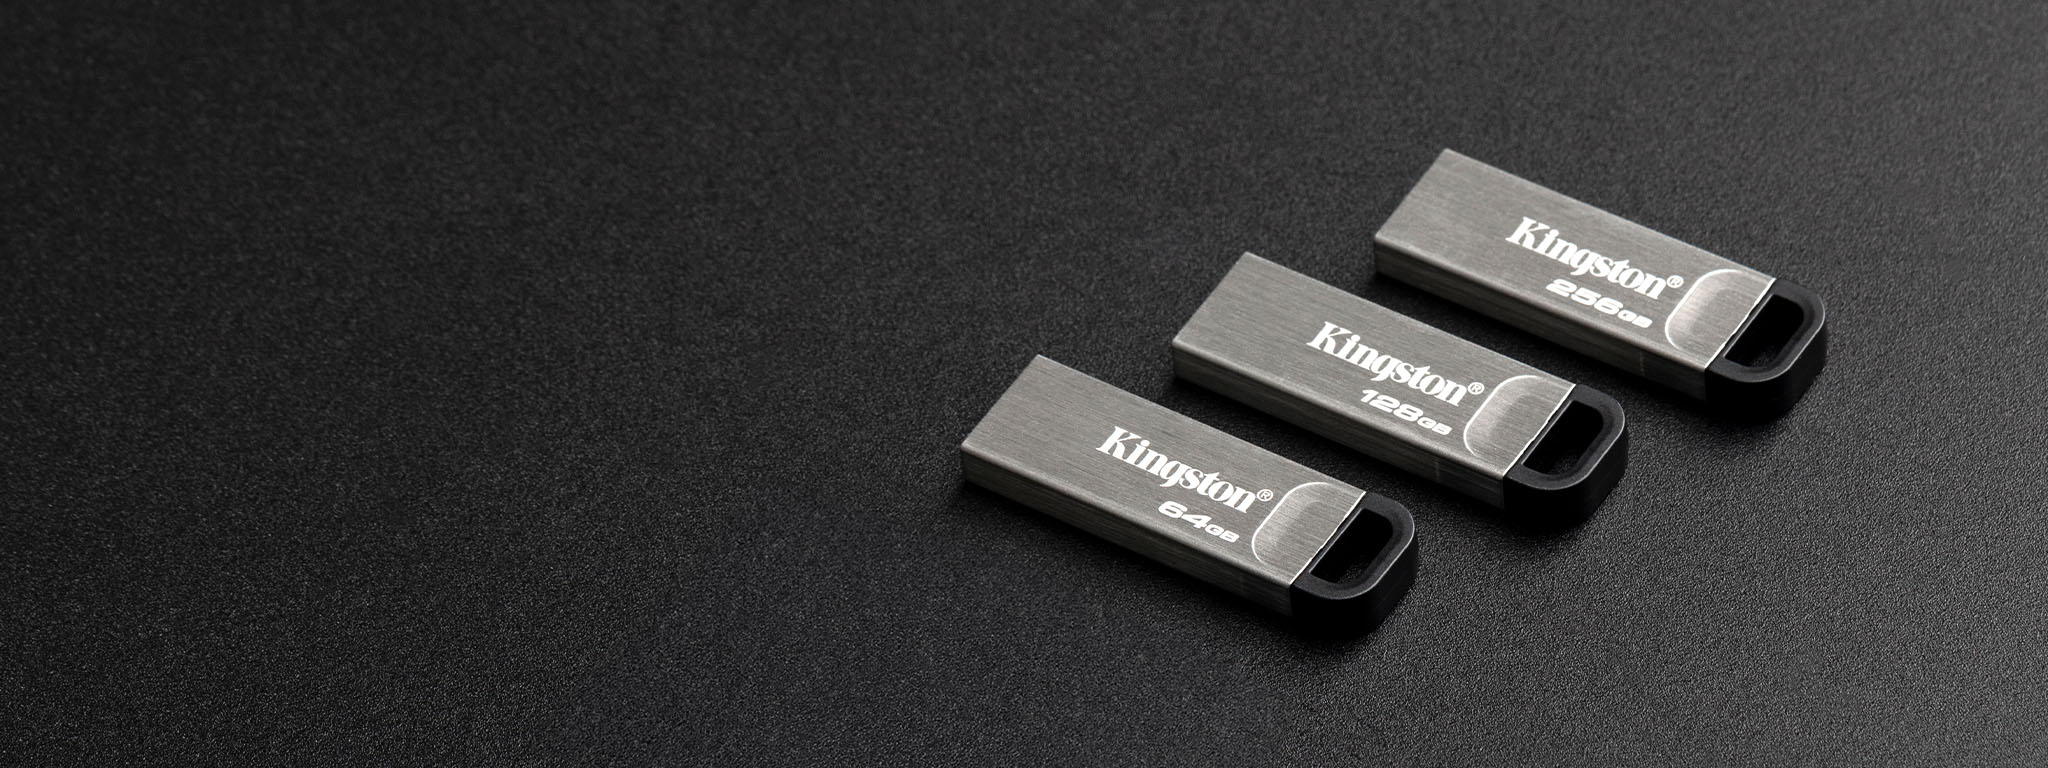 Overhead view of four different capacities of DT Kyson USB flash drives sitting on a black surface